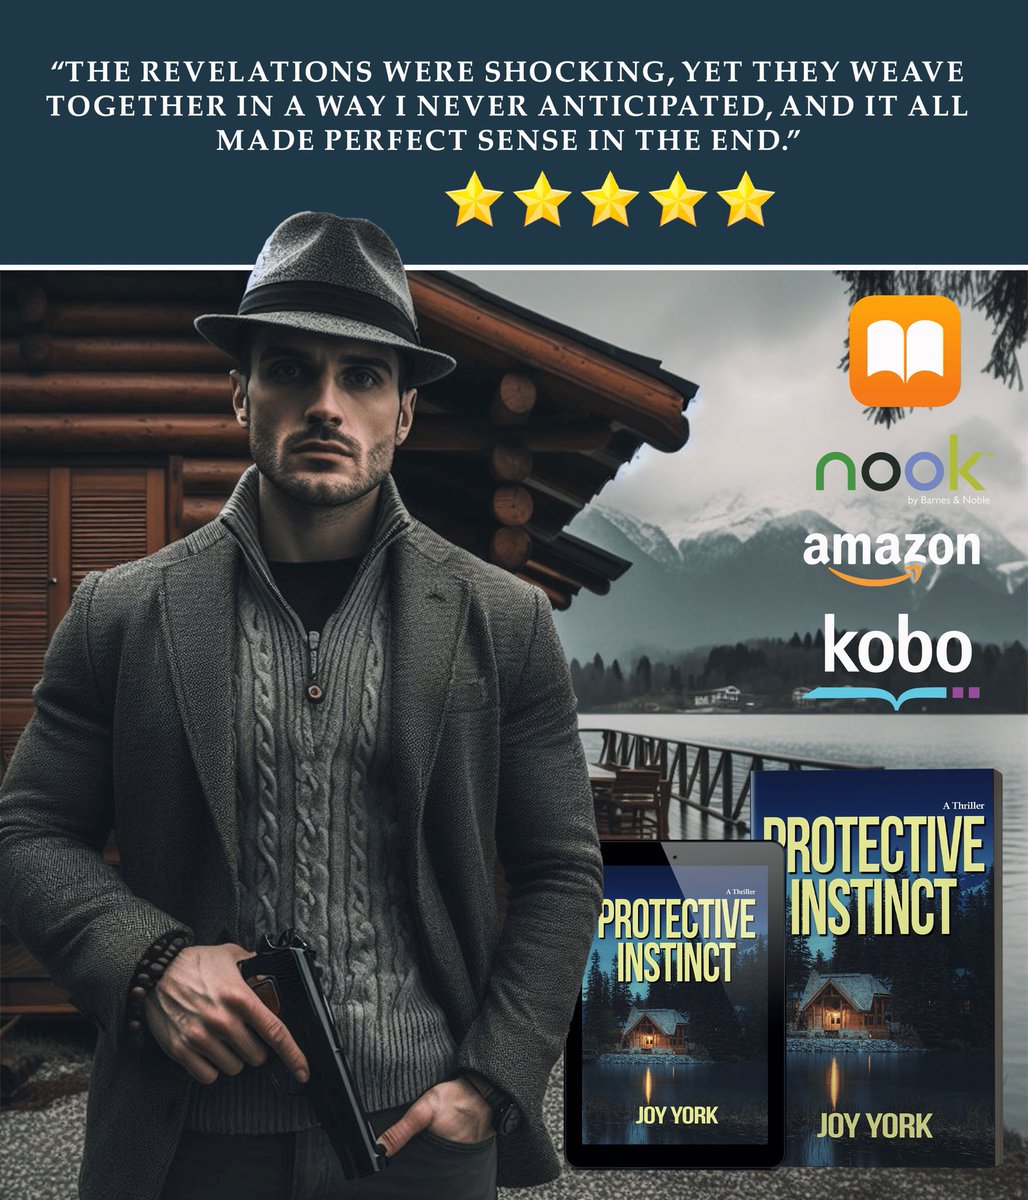 PROTECTIVE INSTINCT Joy York Anything can happen when a bestselling crime novelist and a southern kindergarten teacher are running from the mob! #thriller #suspense #CrimeFiction #actionadventure #GooglePlay Banner by @KathleenHarrym1 Available on Amazon:…